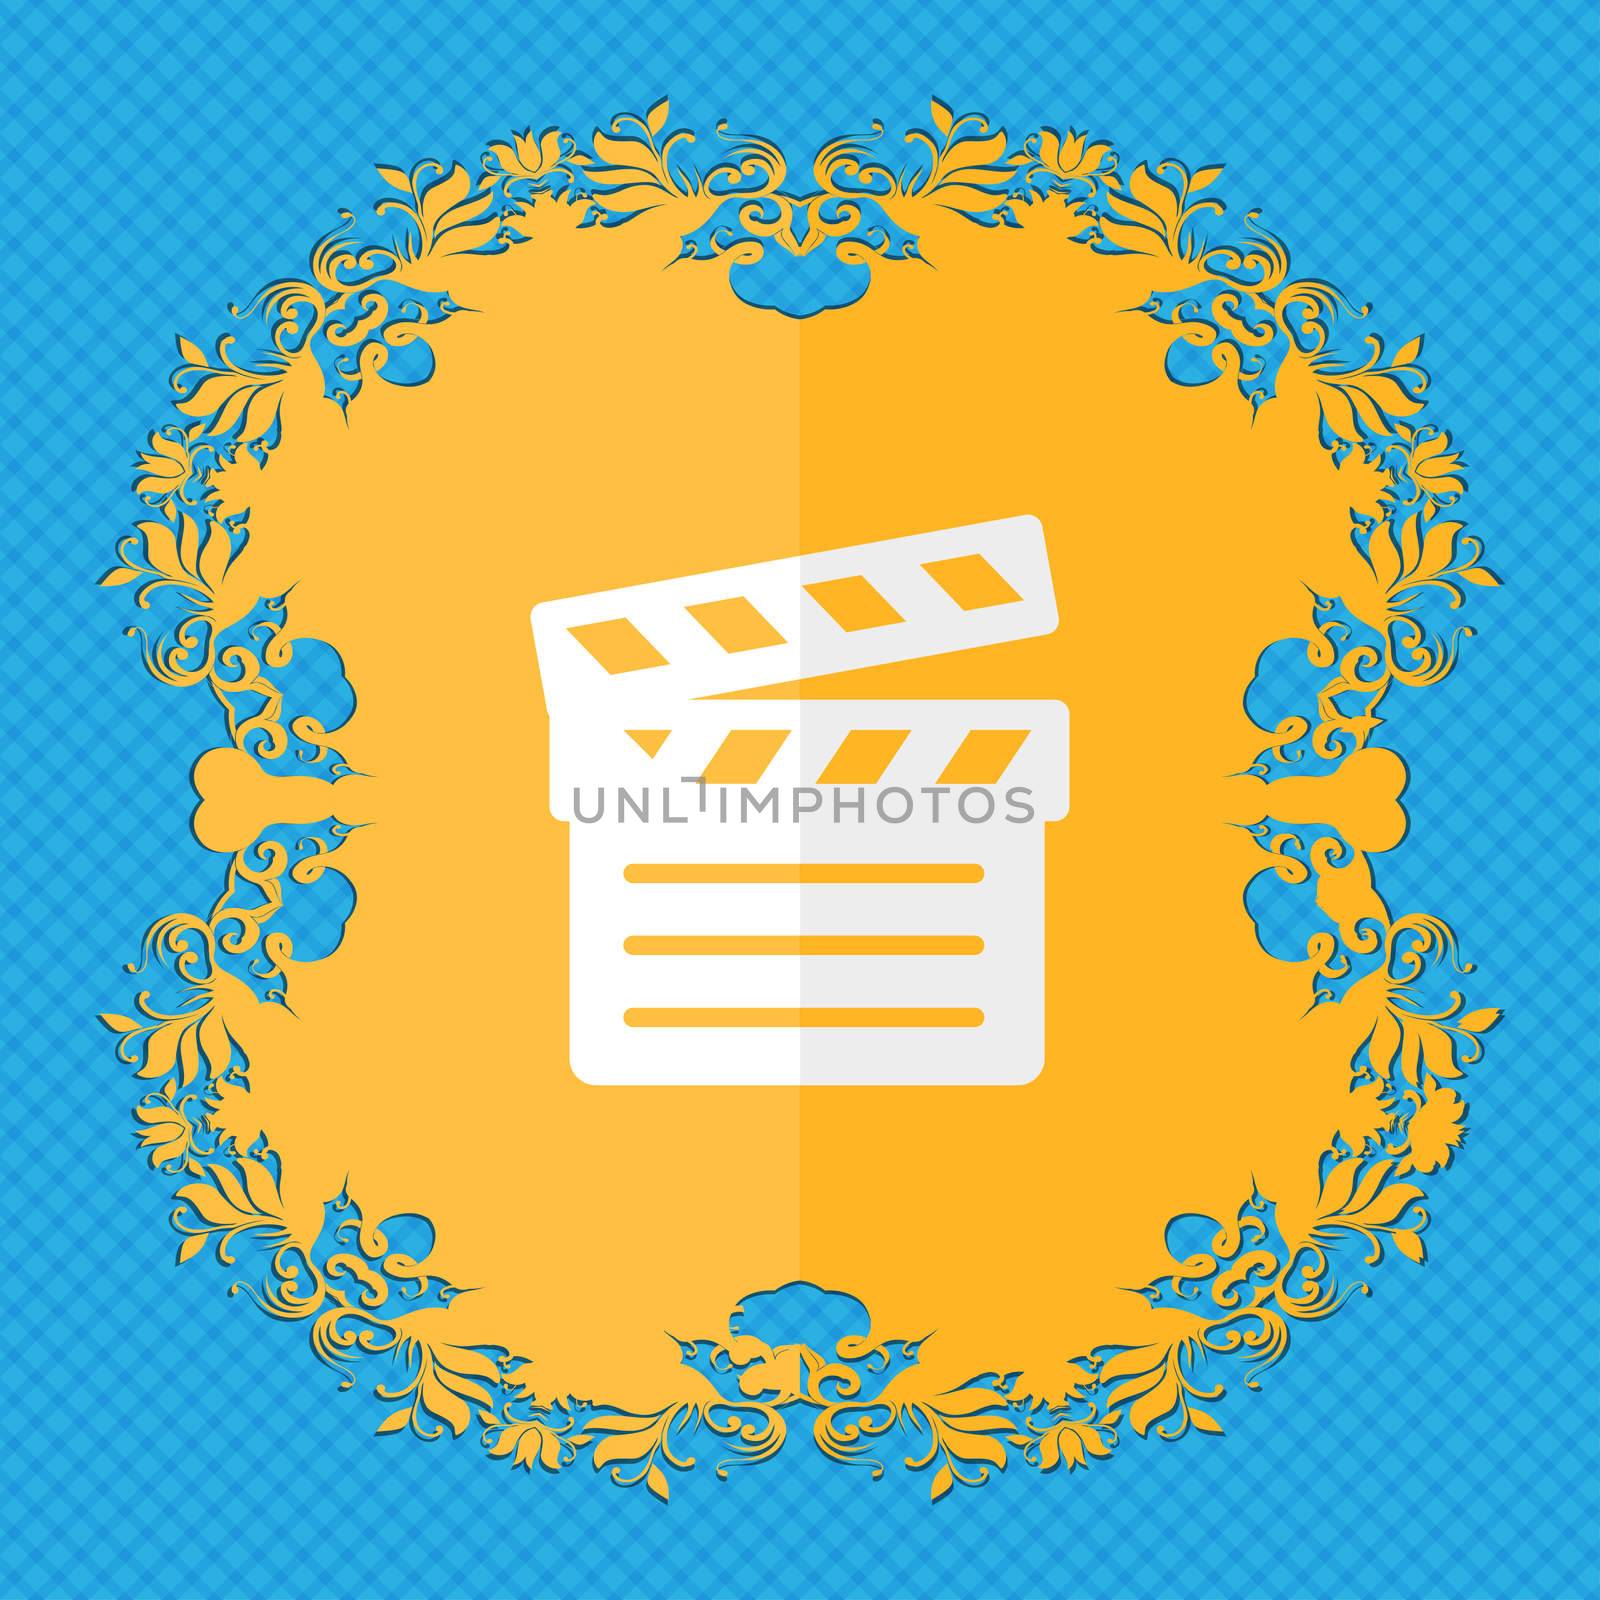 Cinema Clapper. Floral flat design on a blue abstract background with place for your text. illustration